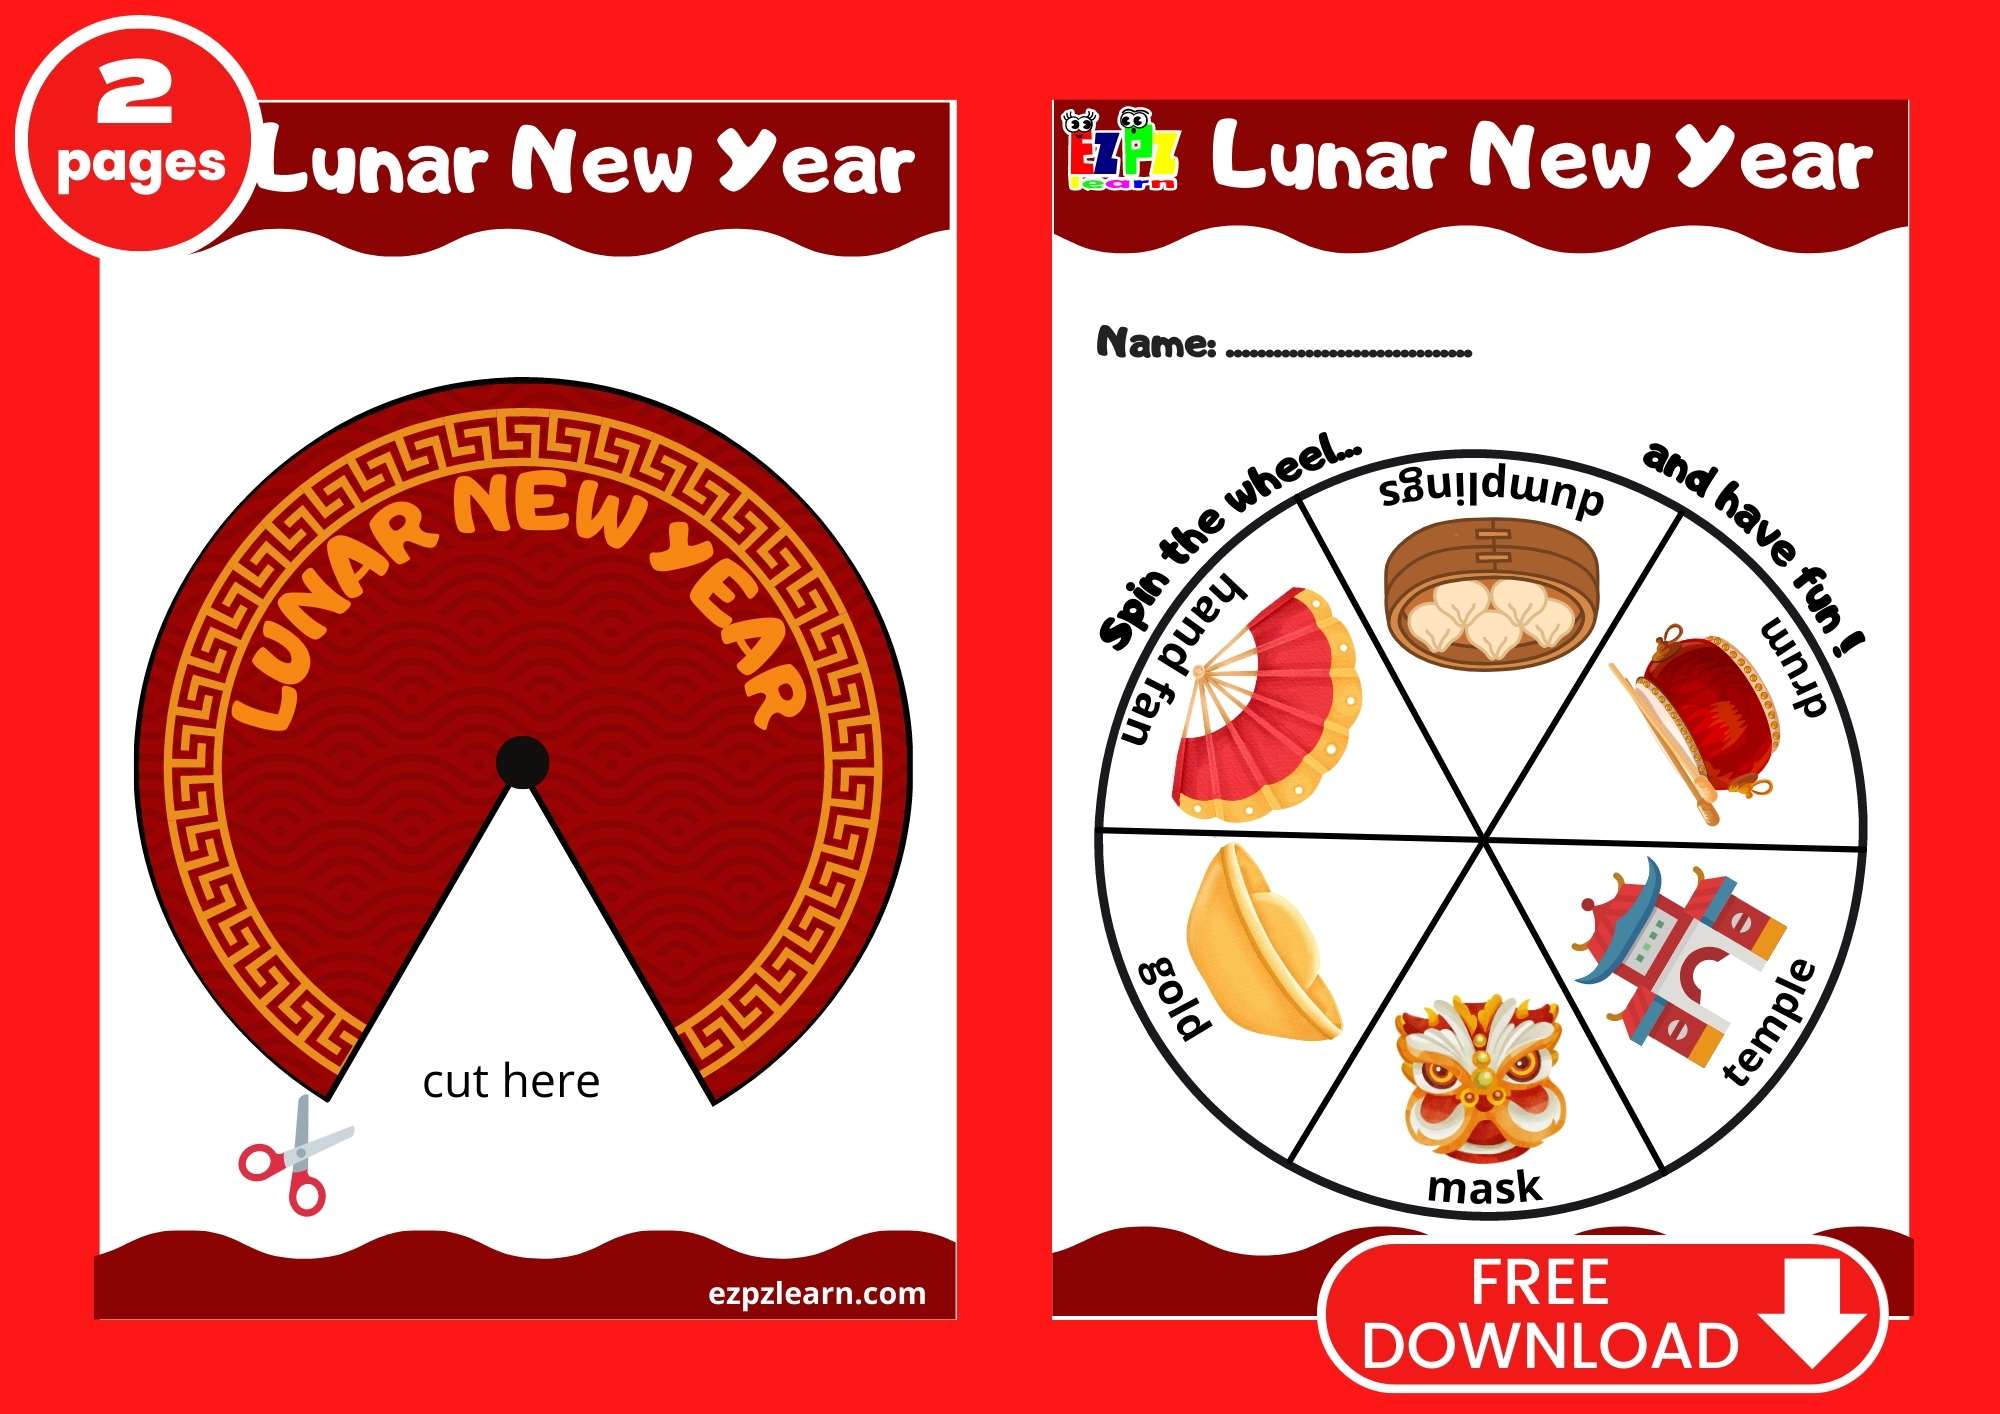 Lunar (Chinese) New Year